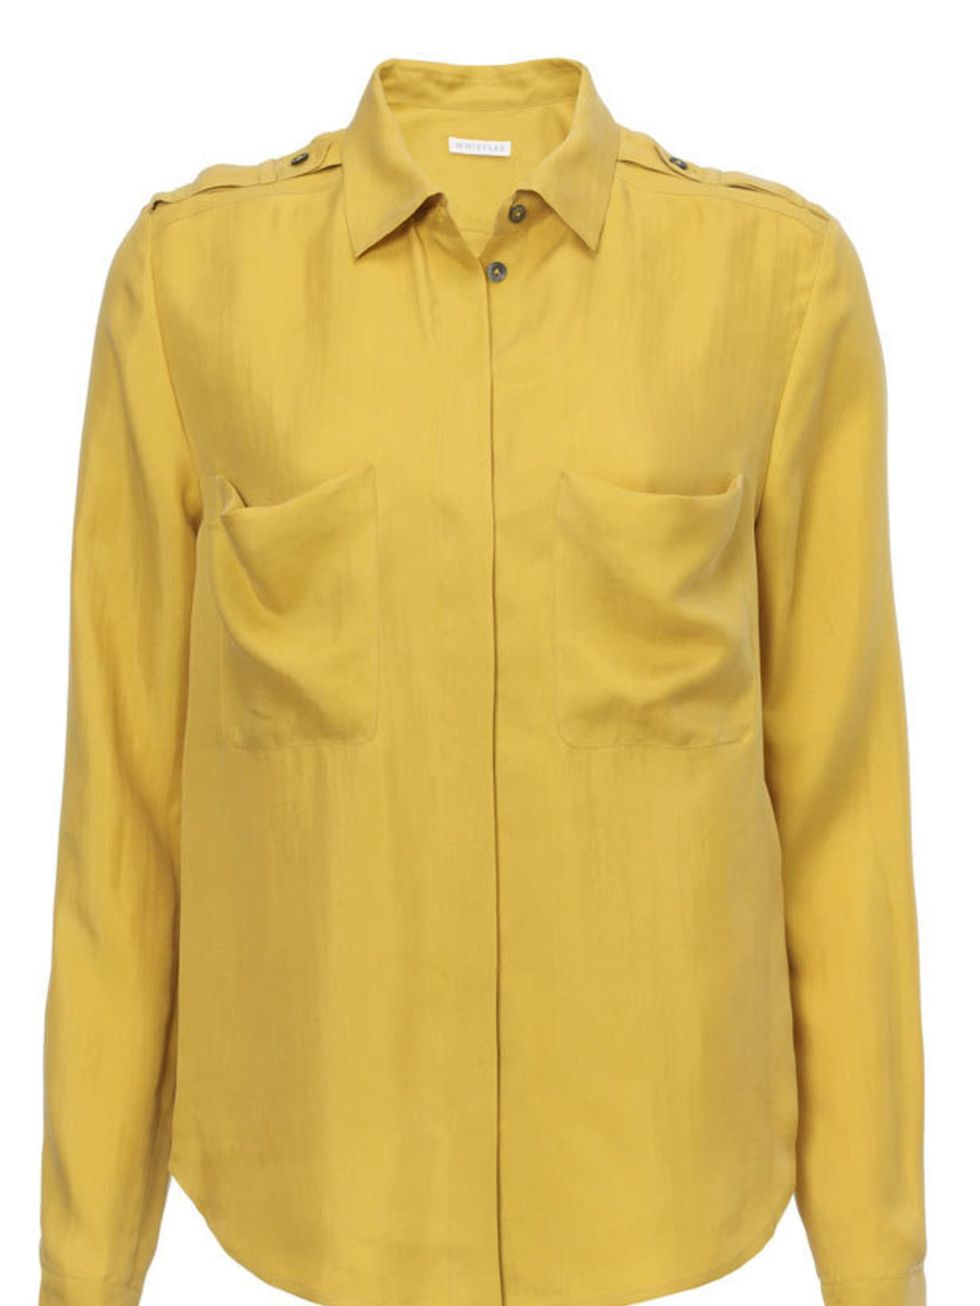 <p><a href="http://www.whistles.co.uk/fcp/categorylist/dept/shop?resetFilters=true">Whistles</a> collared shirt, £95</p>